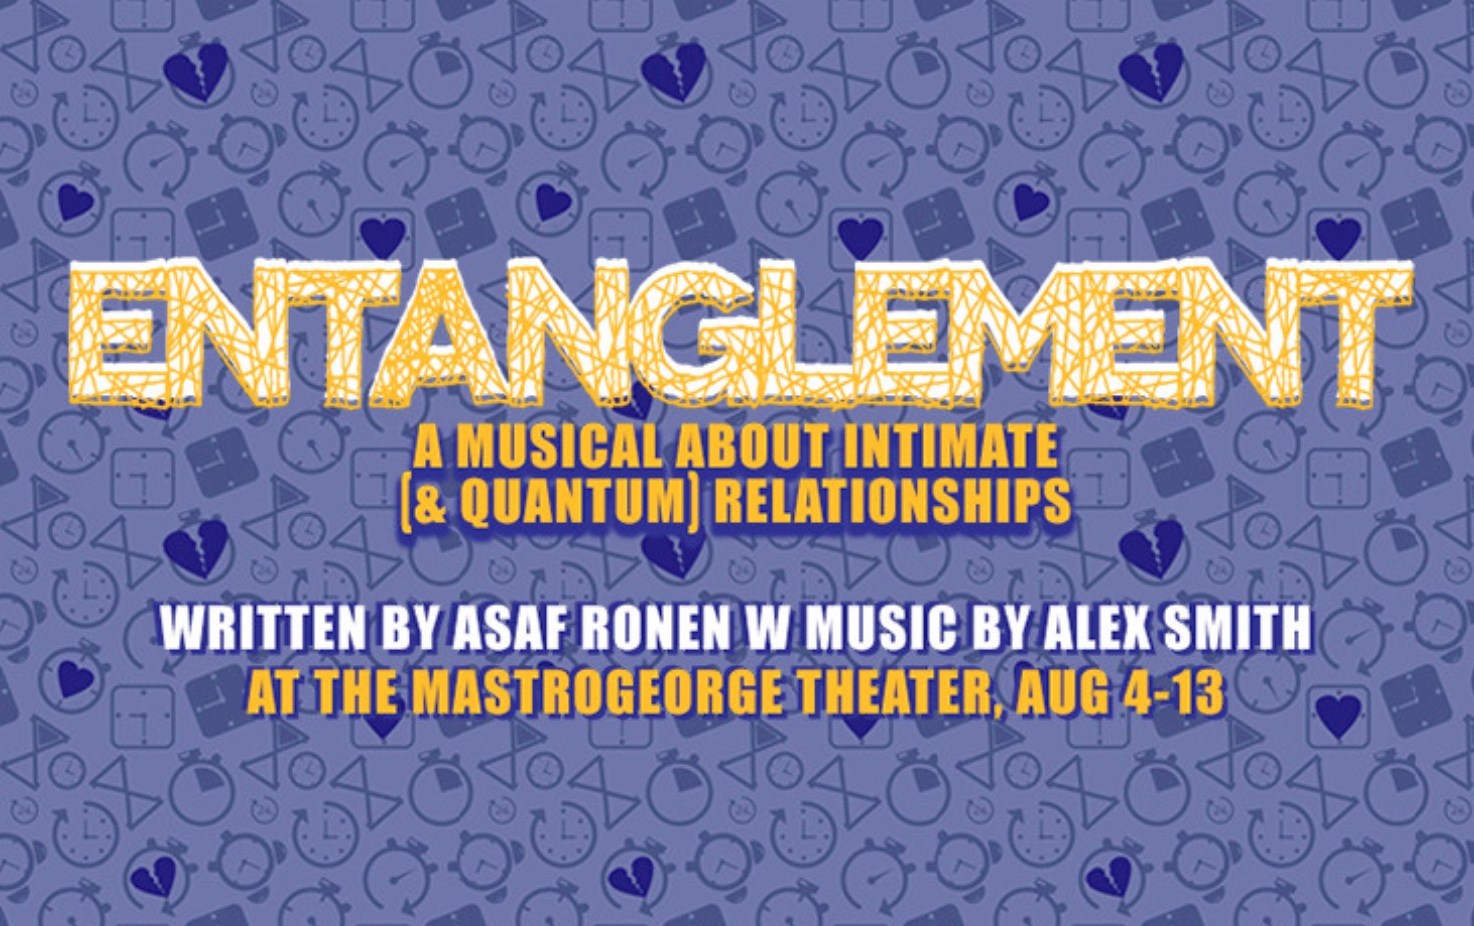 Entanglement by Institution Theatre